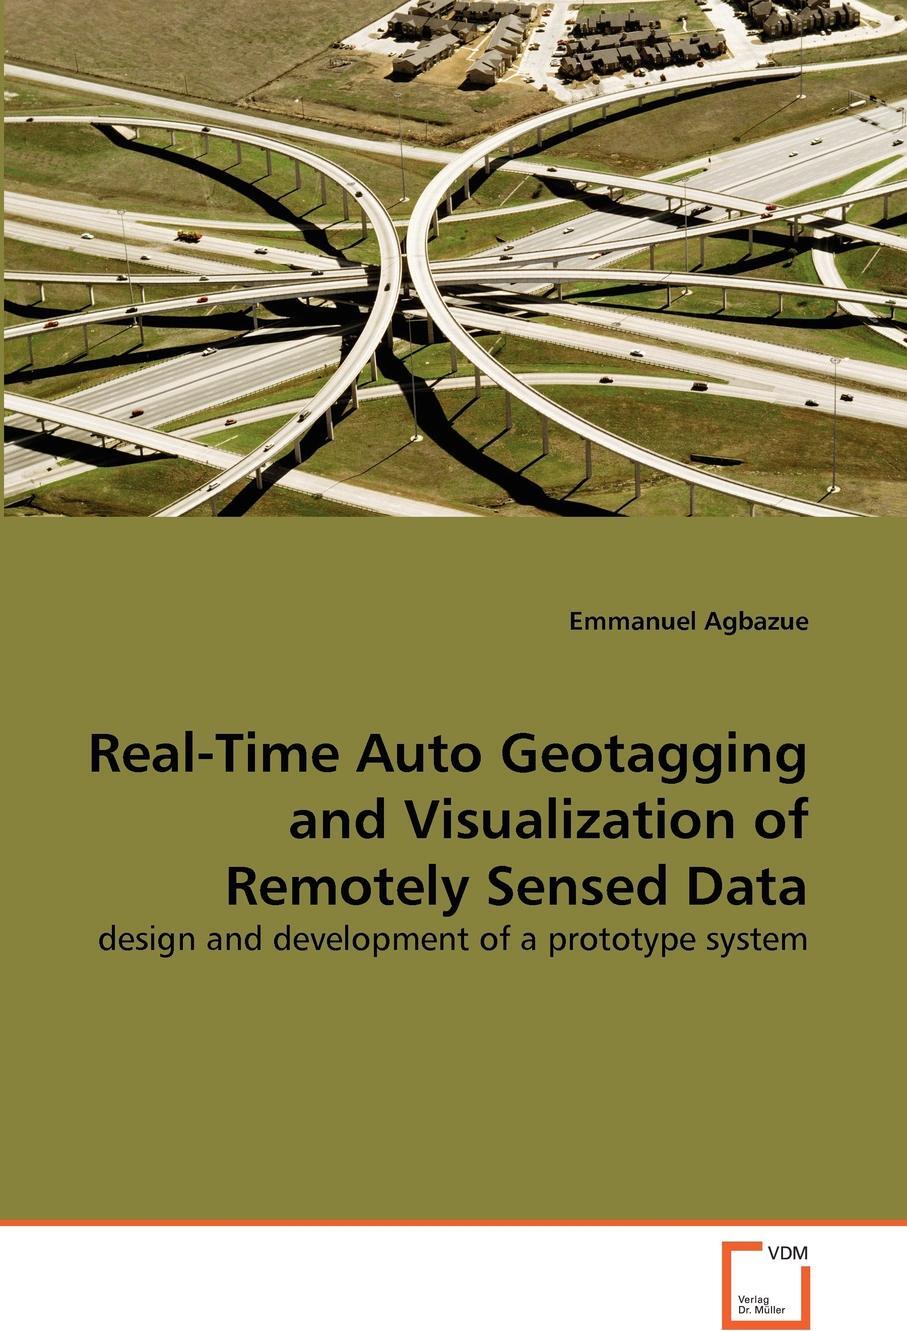 фото Real-Time Auto Geotagging and Visualization of Remotely Sensed Data